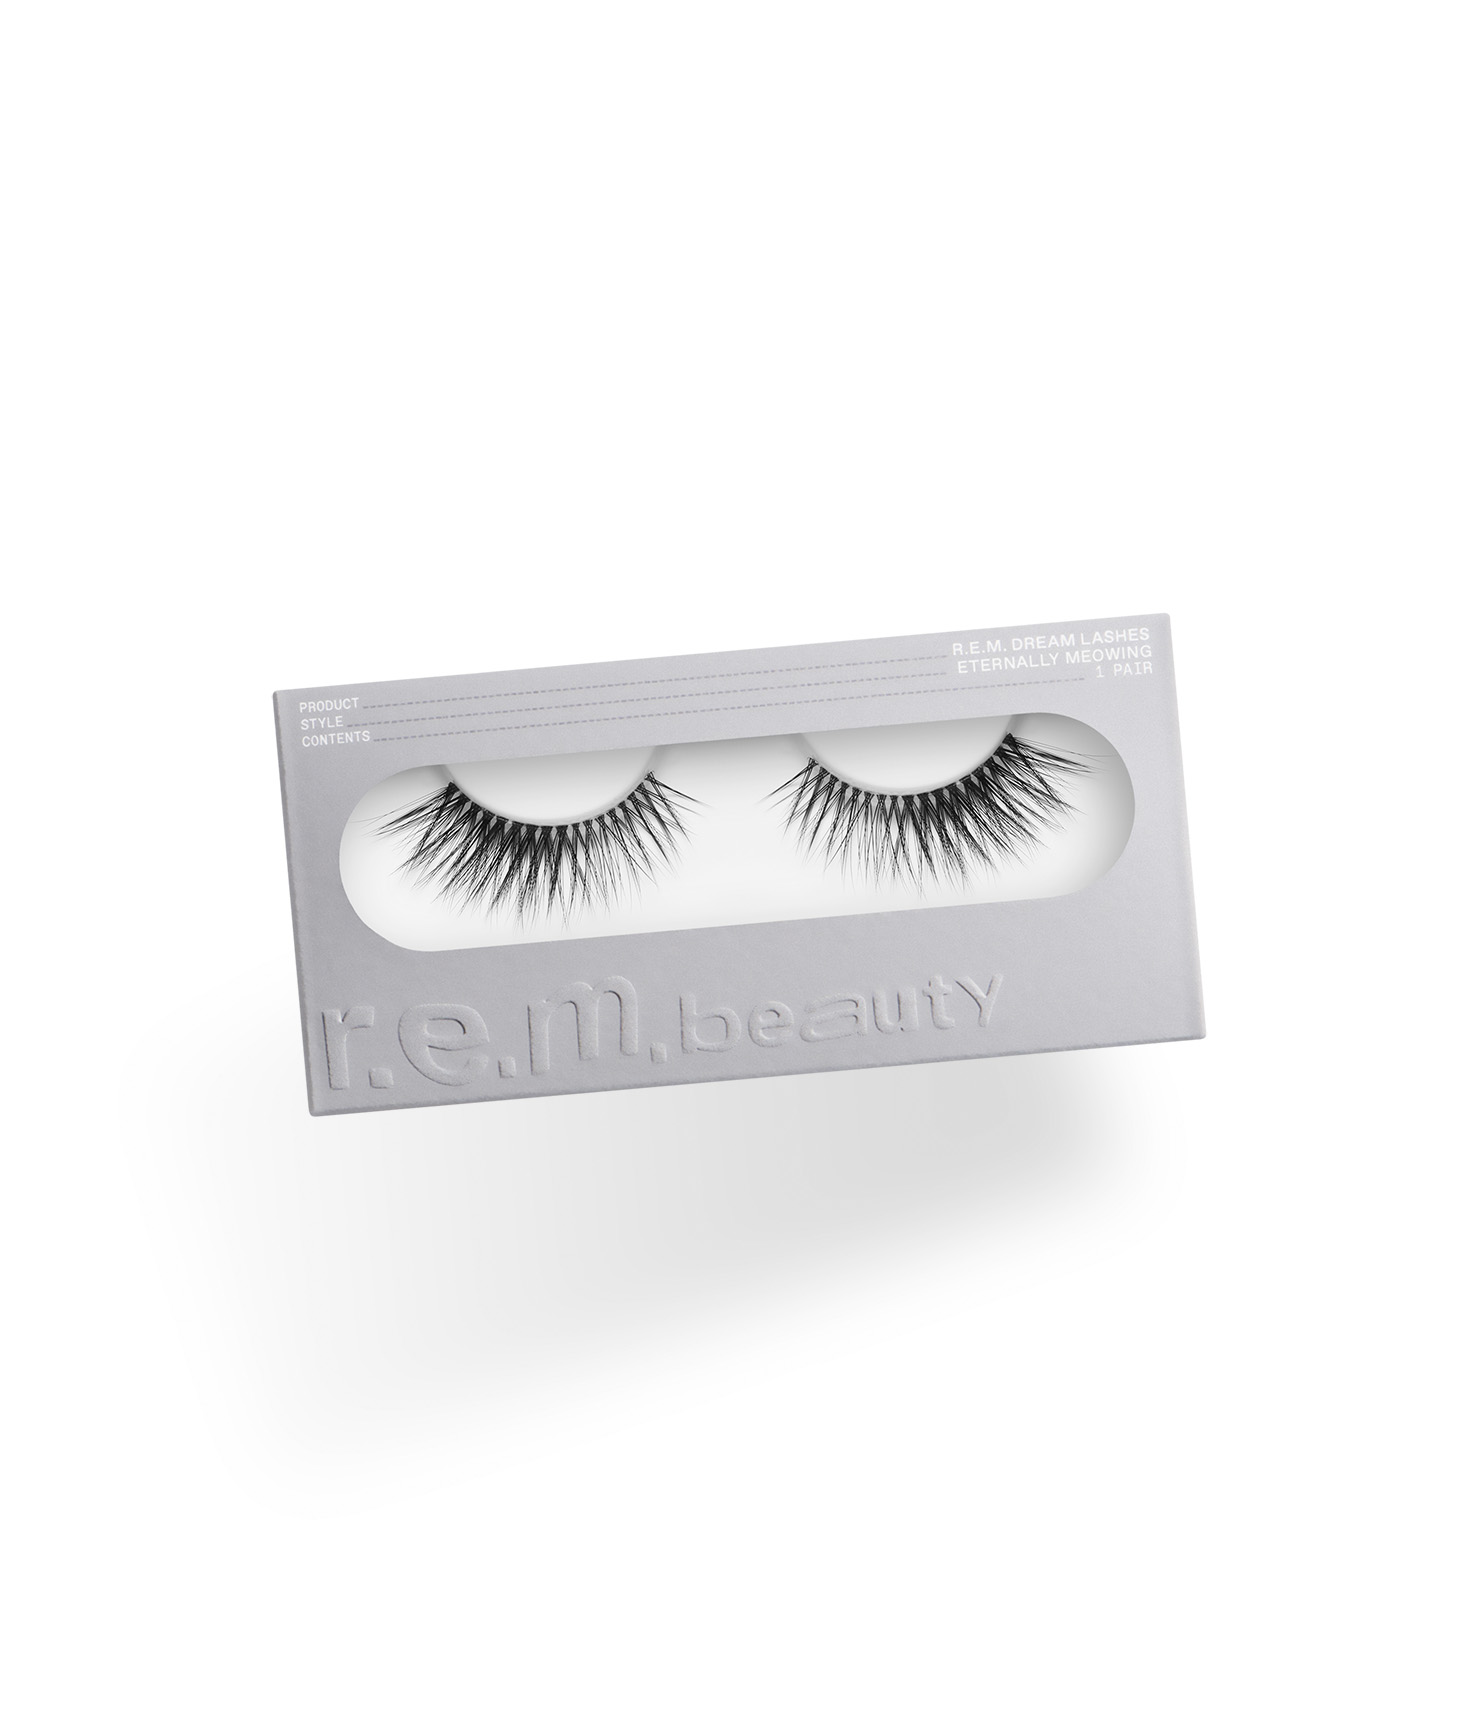 R.E.M. Beauty Dream Lashes in Eternally Meowing